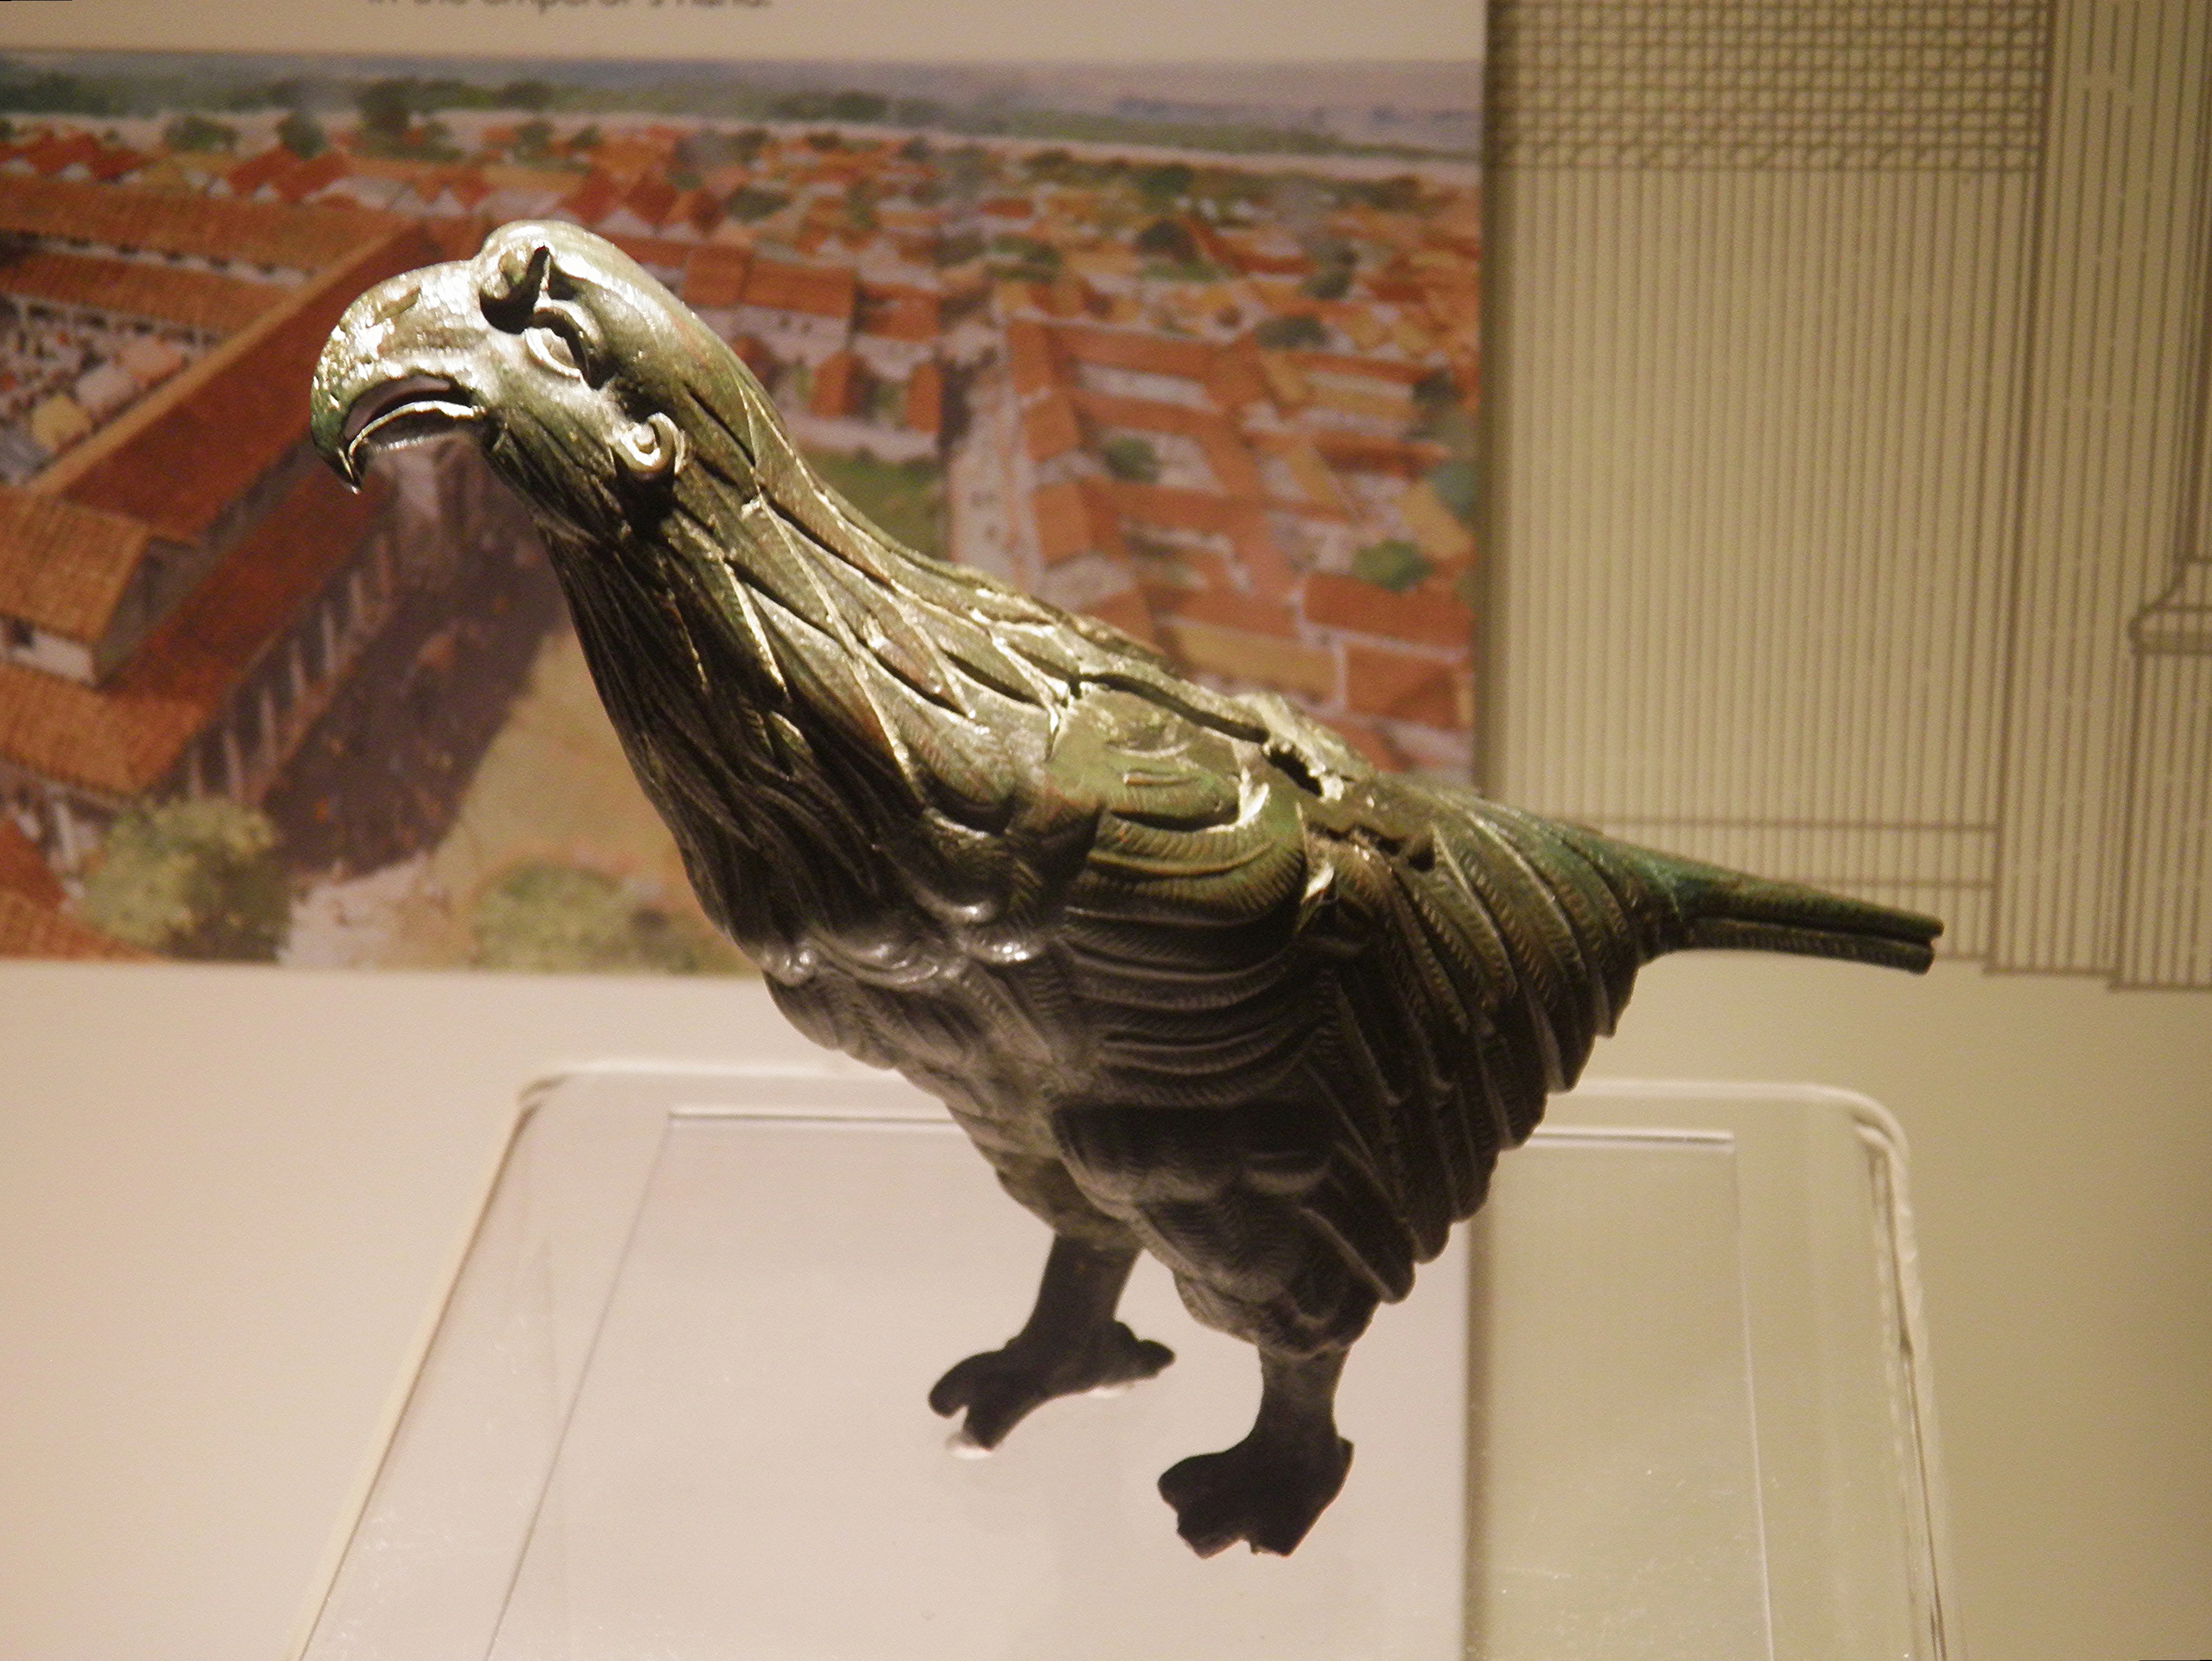 The Silchester eagle of the Roman Ninth Legion